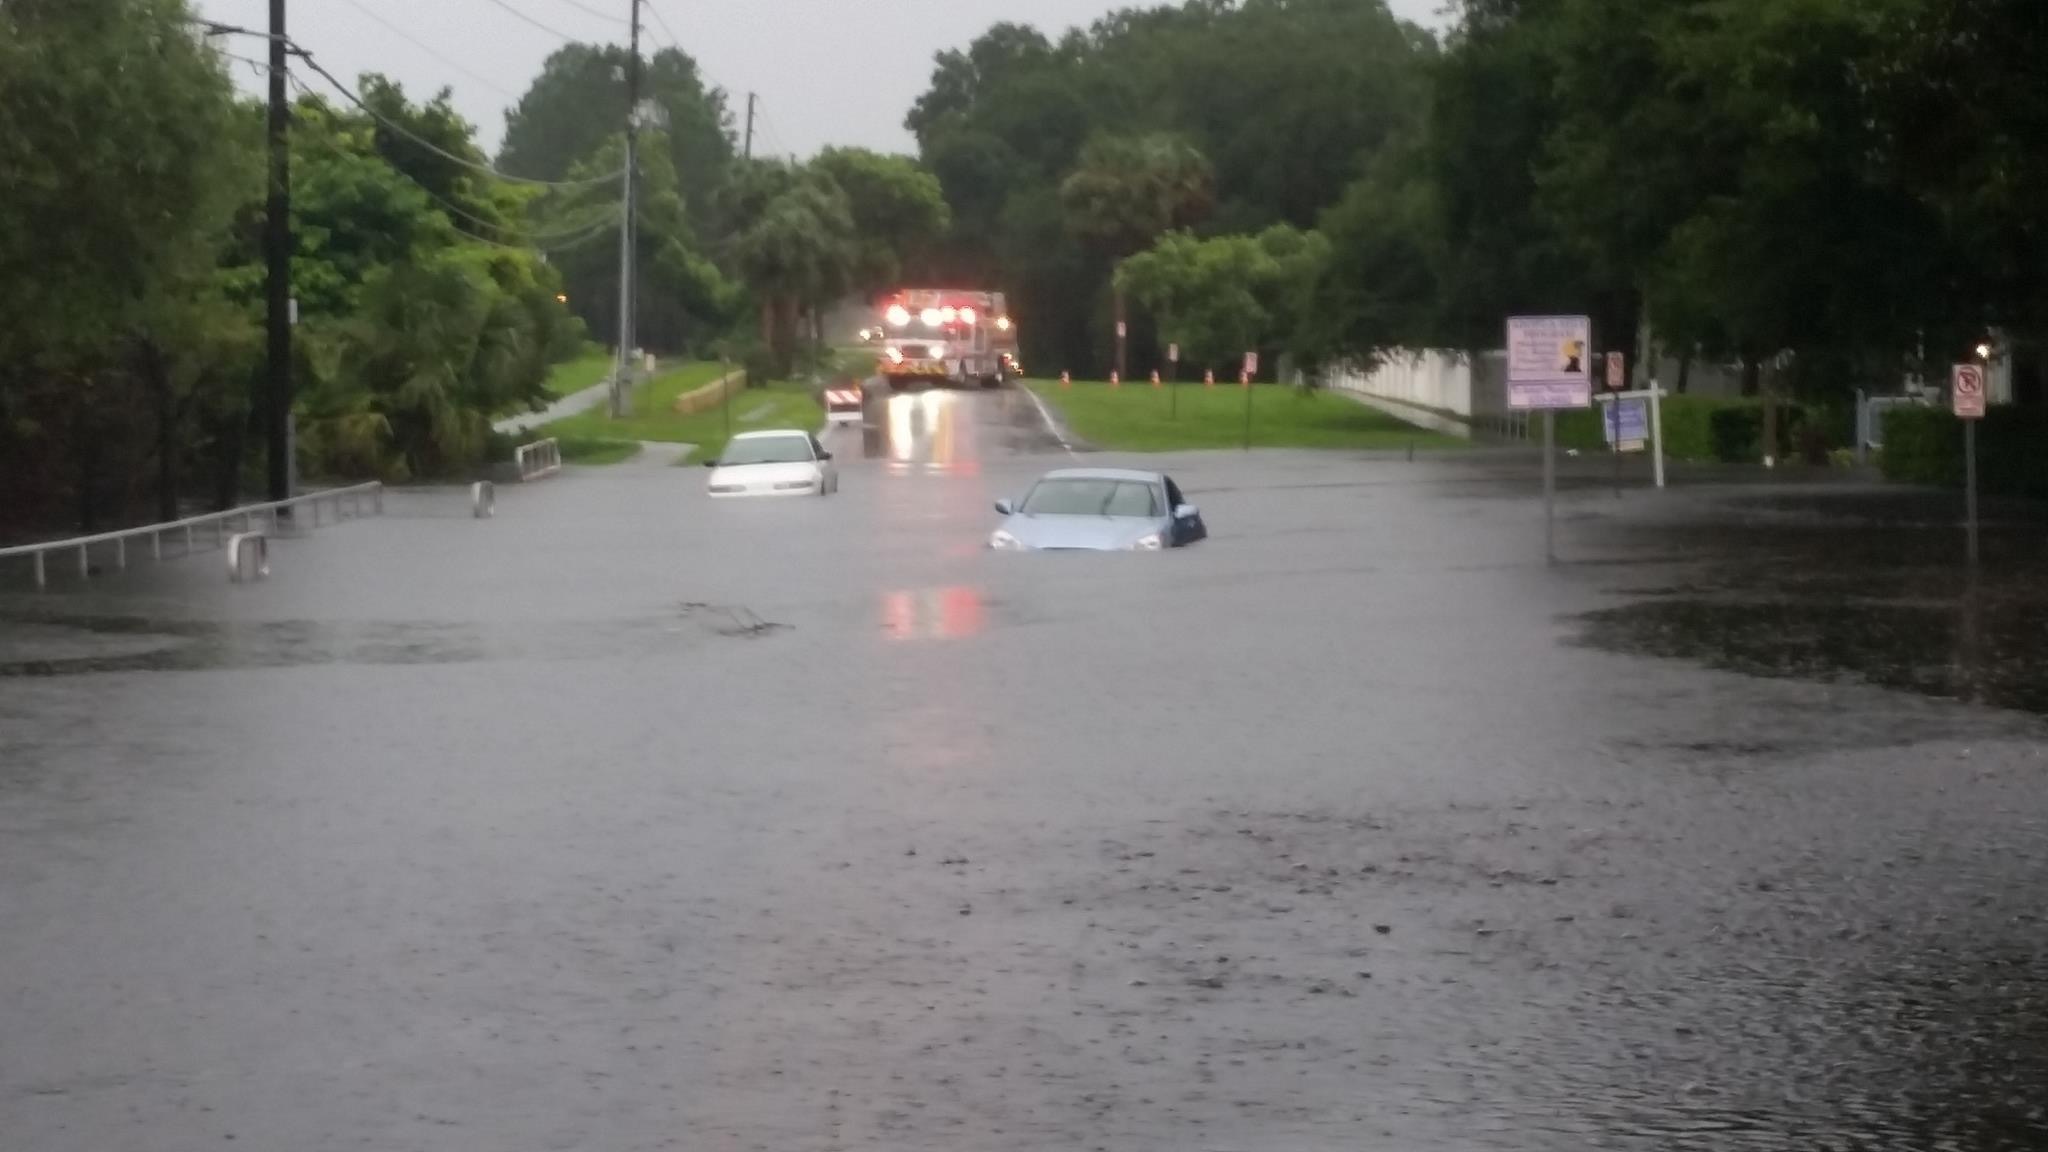 A flooded street in Pinellas County, Florida.